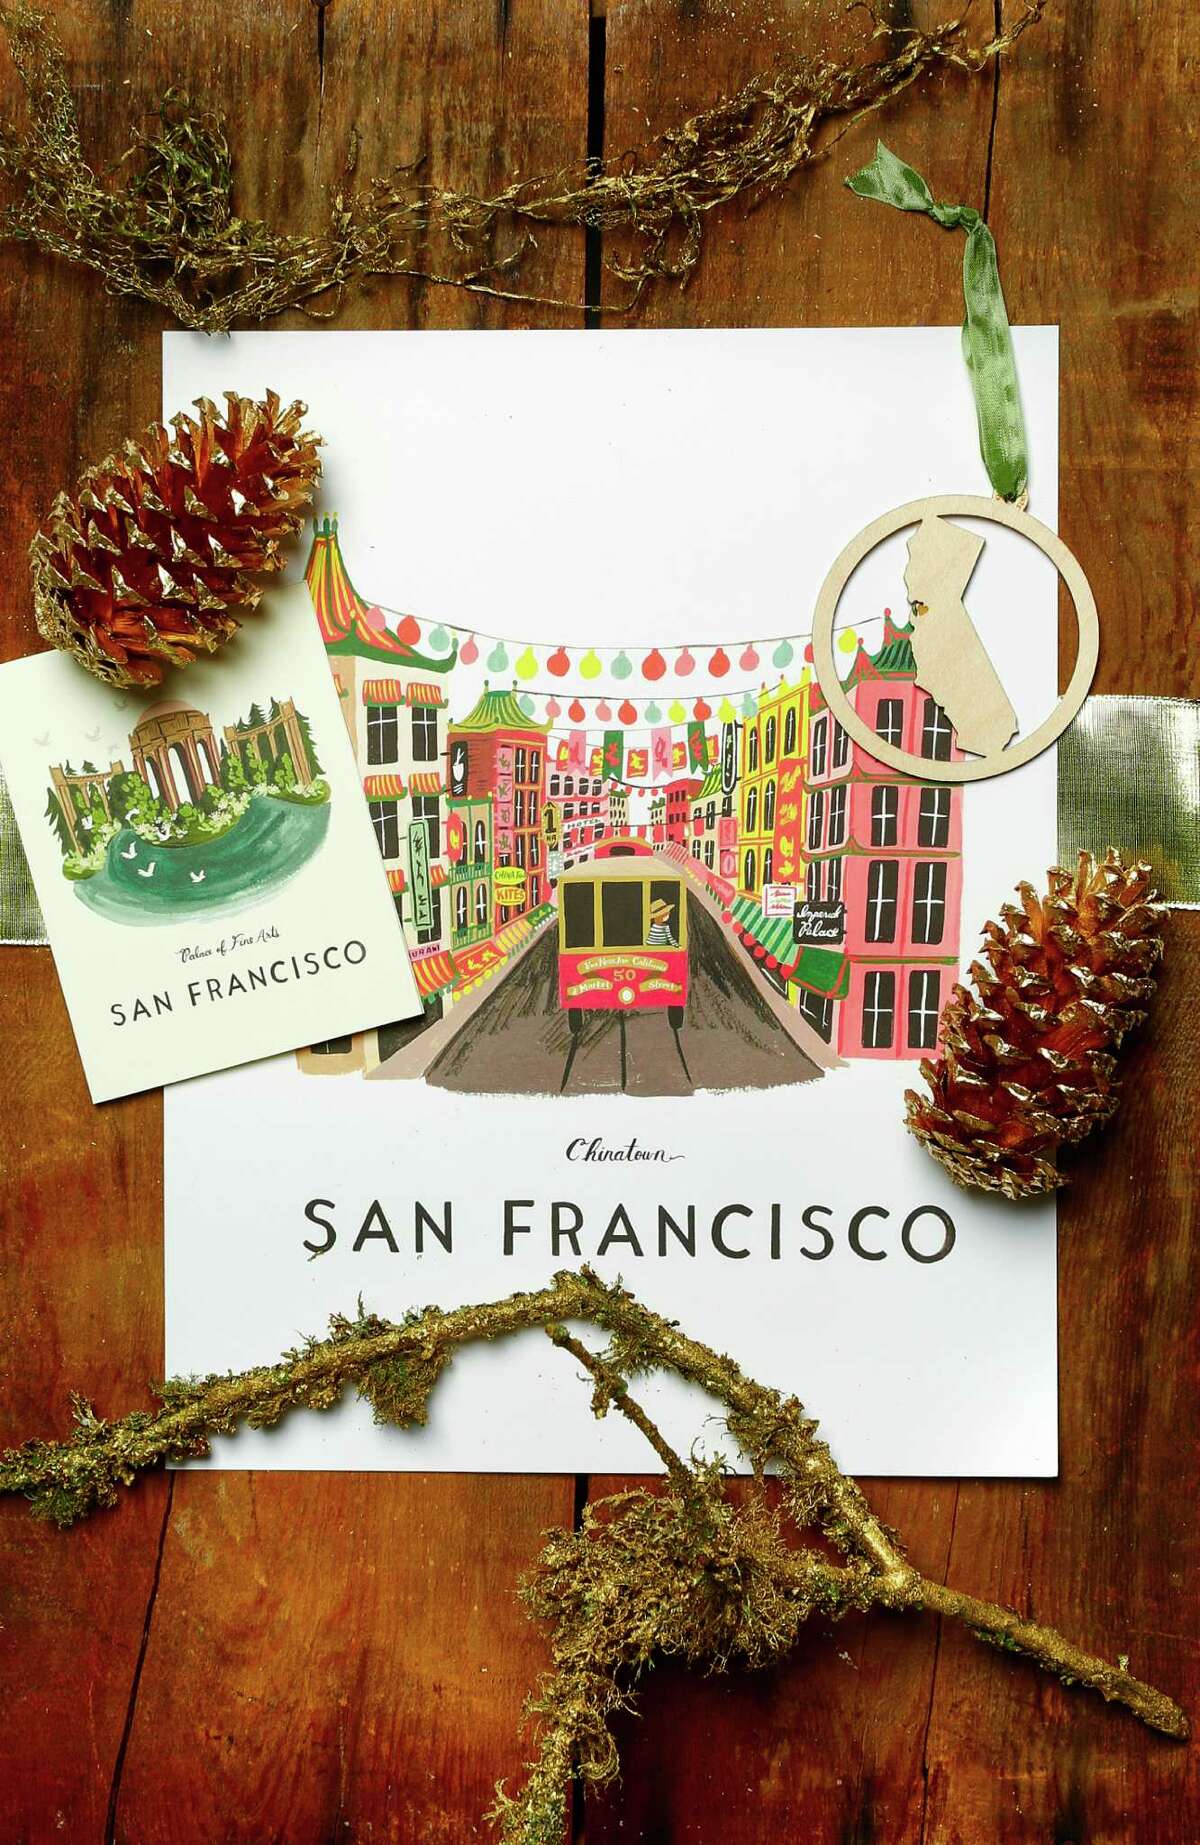 For the LocavoreRifle Paper Co. Palace of Fine Arts box set of 8 cards ($20, right) and Chinatown 11 by 14 poster ($42); Kimball Prints laser-cut CA heart ornament ($14), all at Lavish, 508 Hayes St., www.shoplavish.com